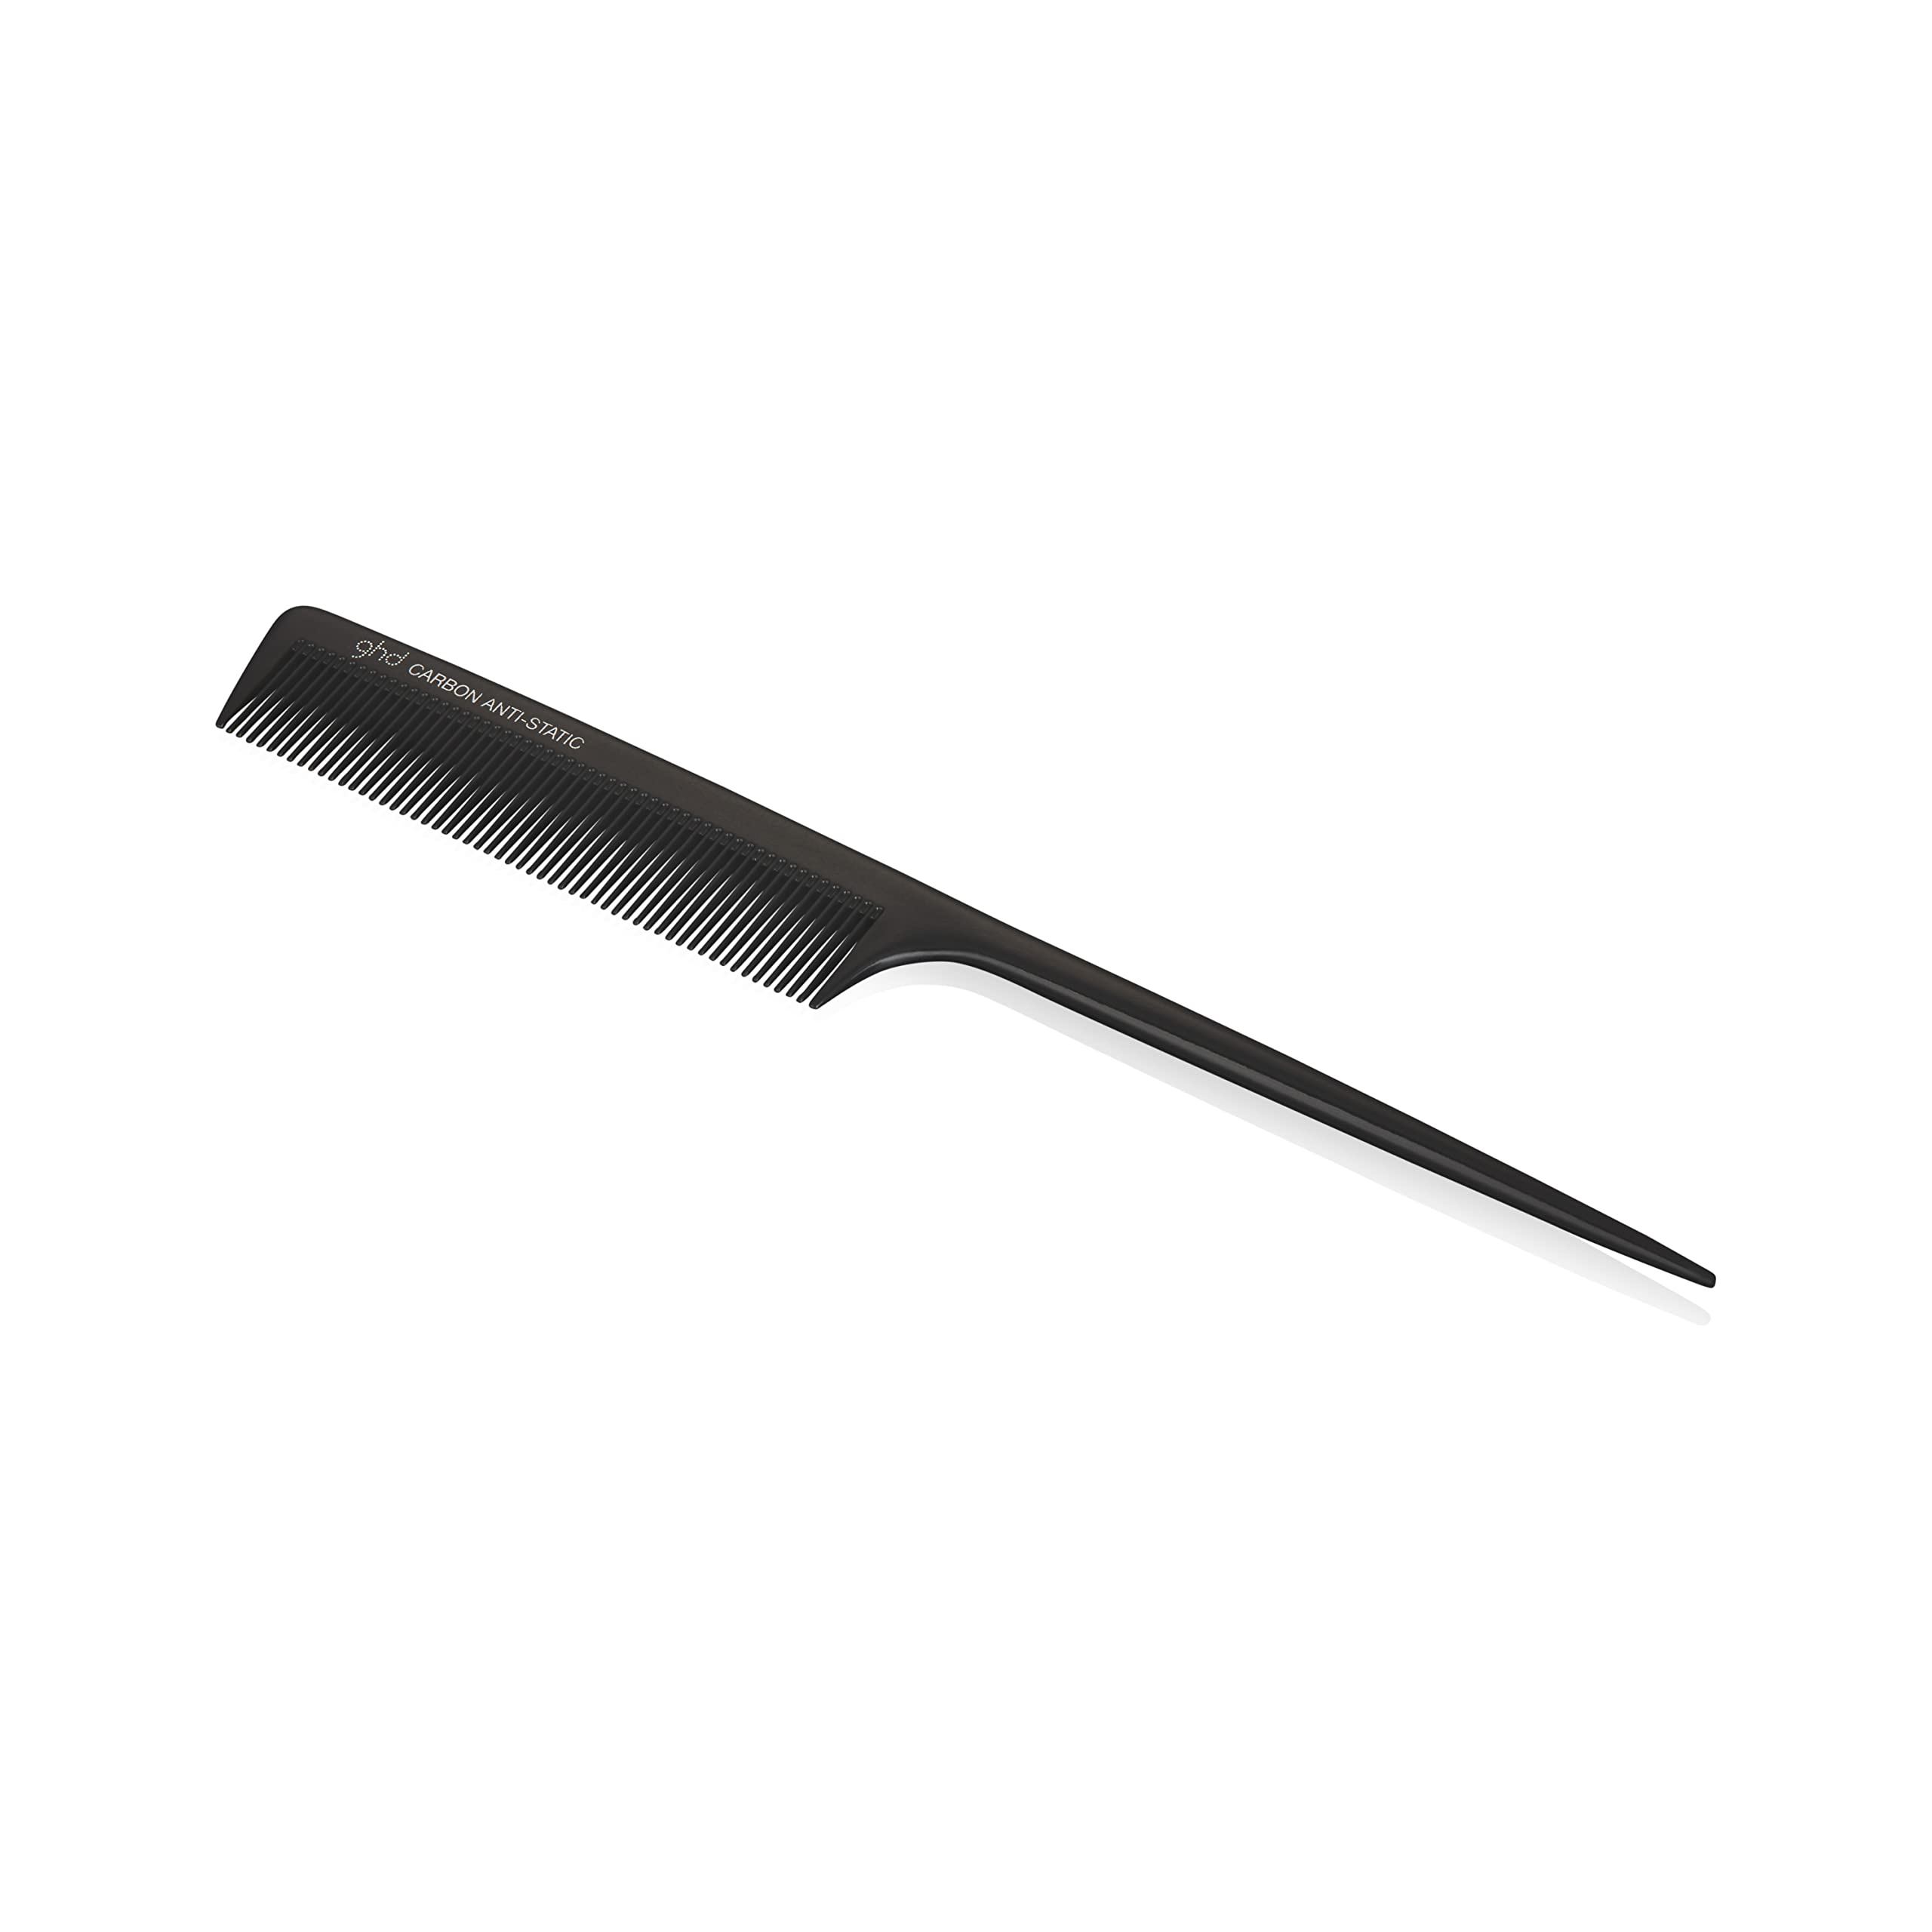 ghd Hair Comb, Tail, 1 Count (Pack of 1)